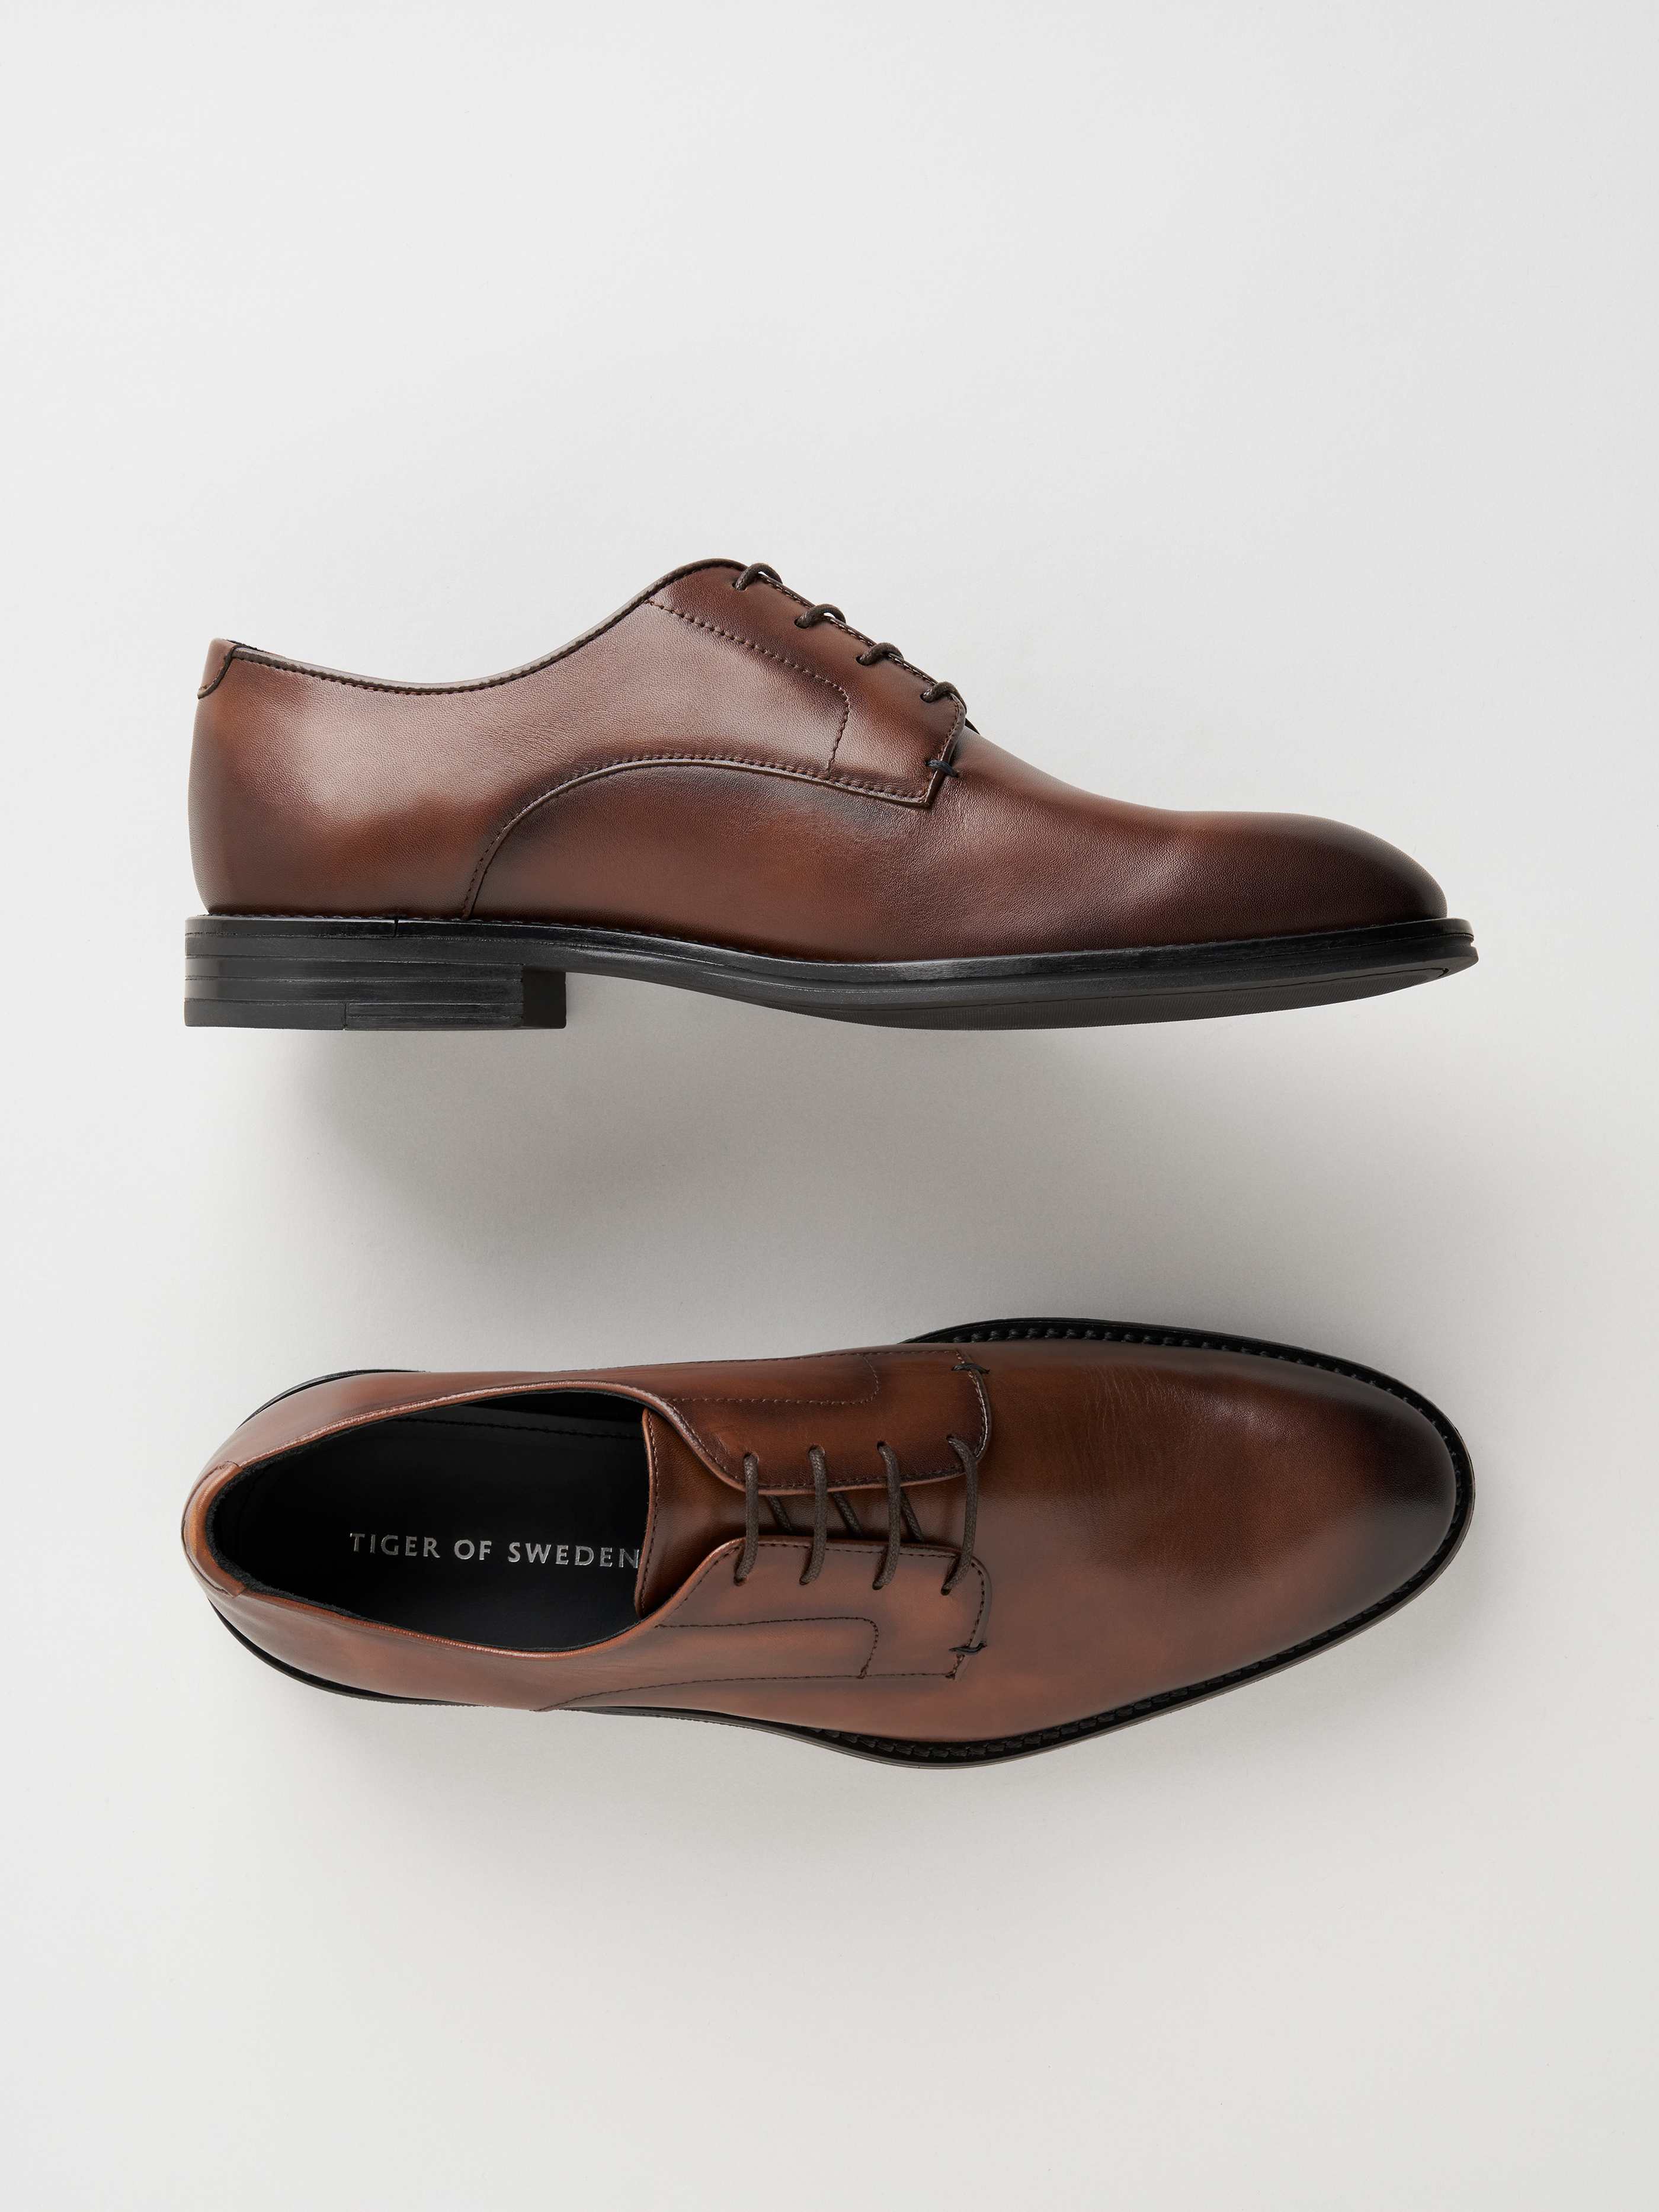 TIGER OF SWEDEN Trent Shoes in Brown | eightywingold